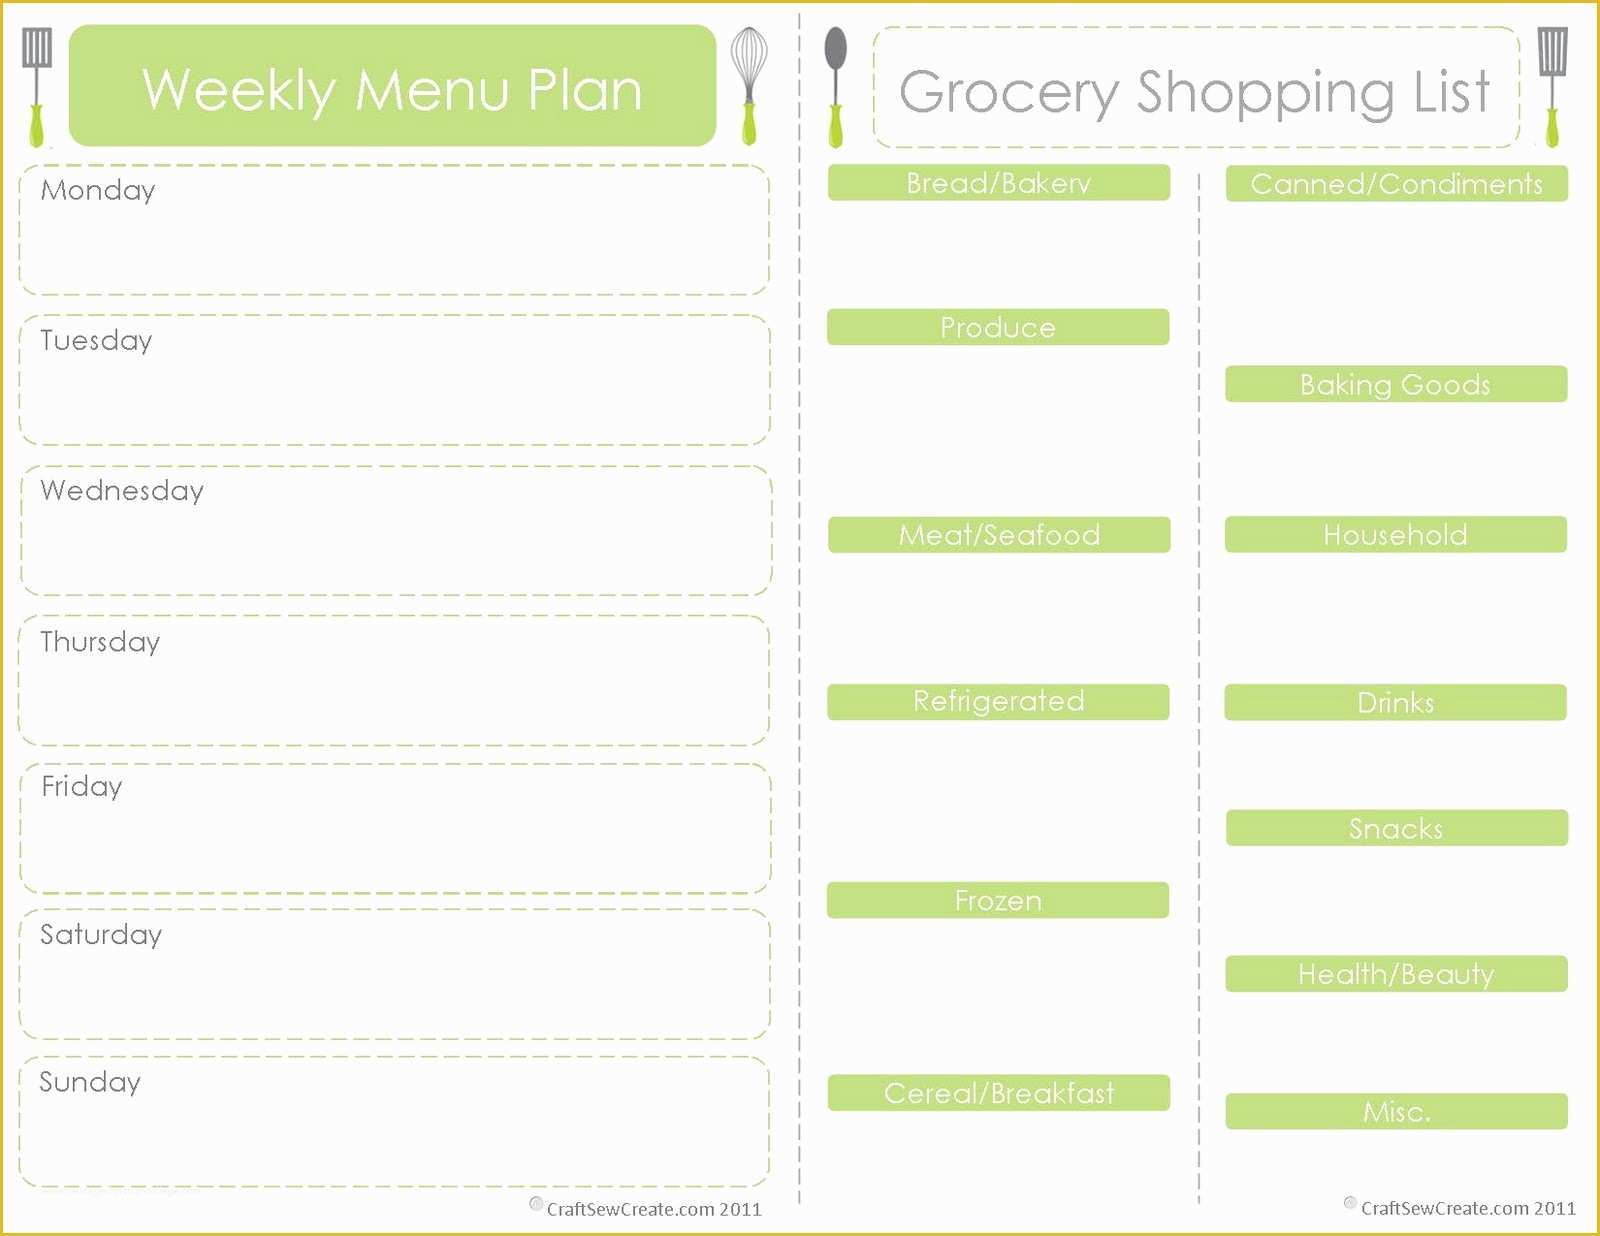 Free Weekly Meal Planner Template with Grocery List Of Craft Sew Create Free Printable Menu Plan Shopping List